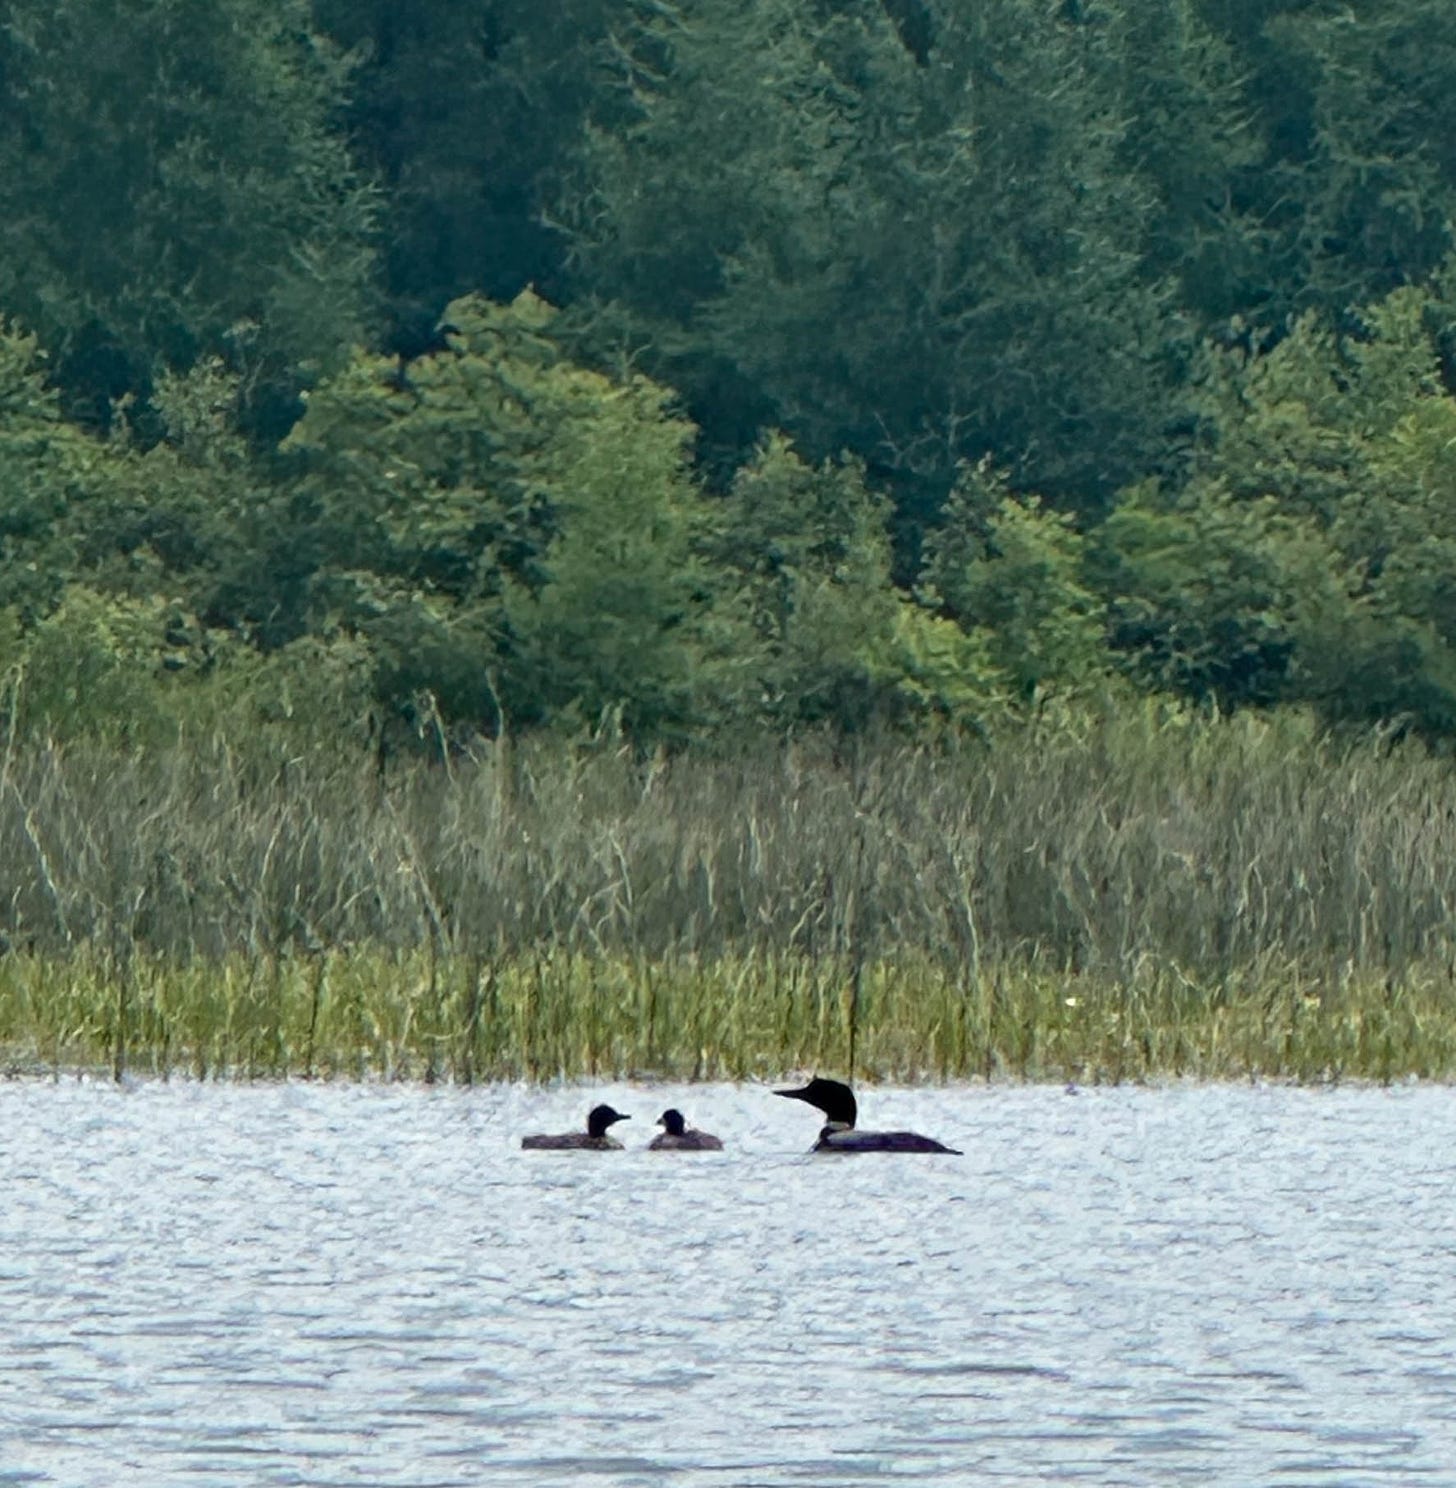 Loons on a lake, one adult and two babies.